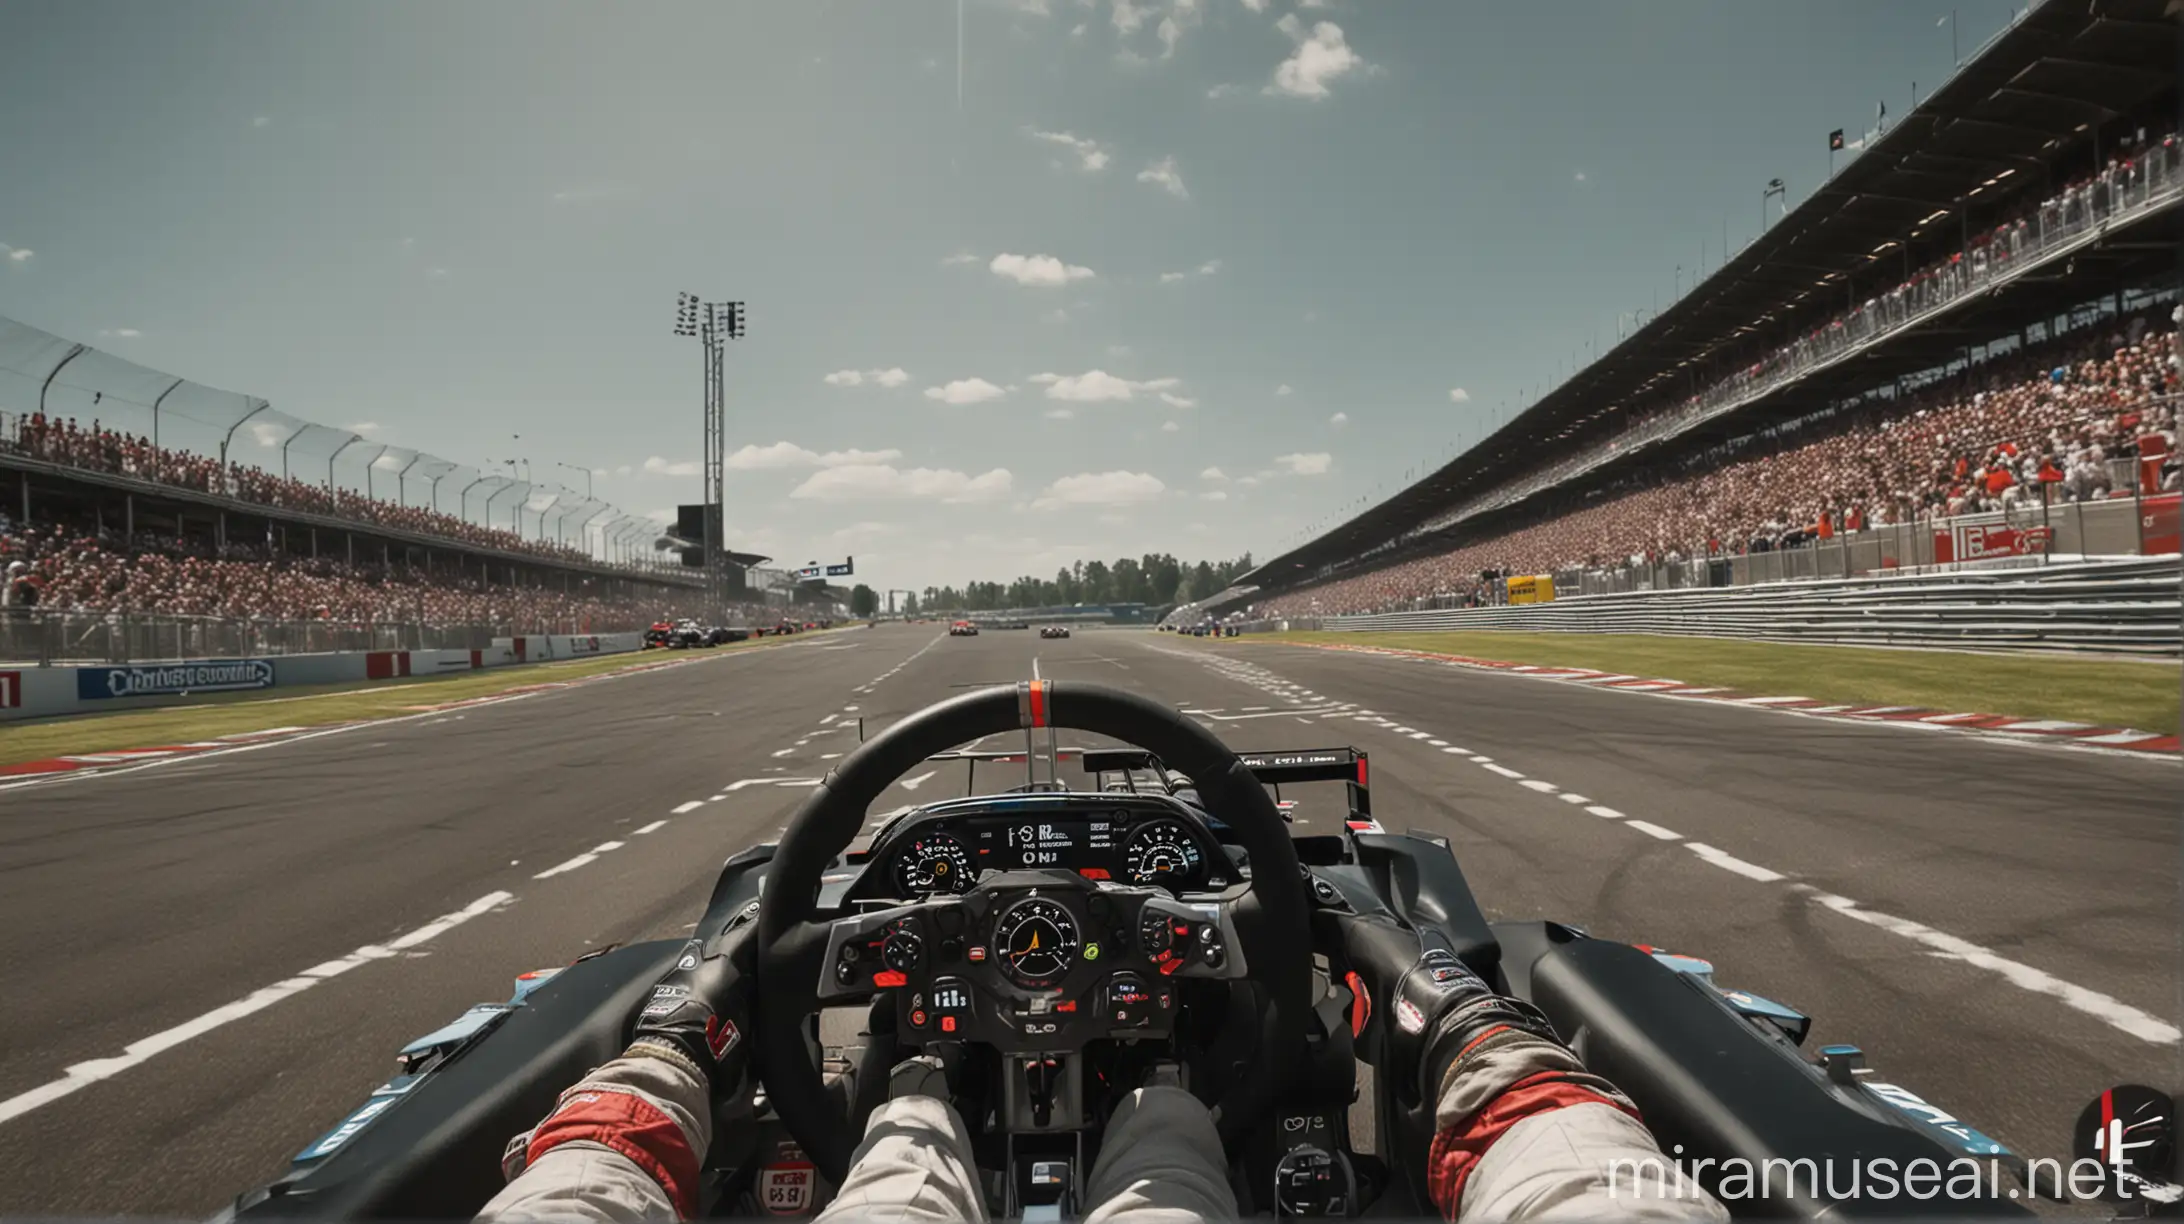 Intense Formula 1 Racing Drivers View with Steering Wheel and Halo Device